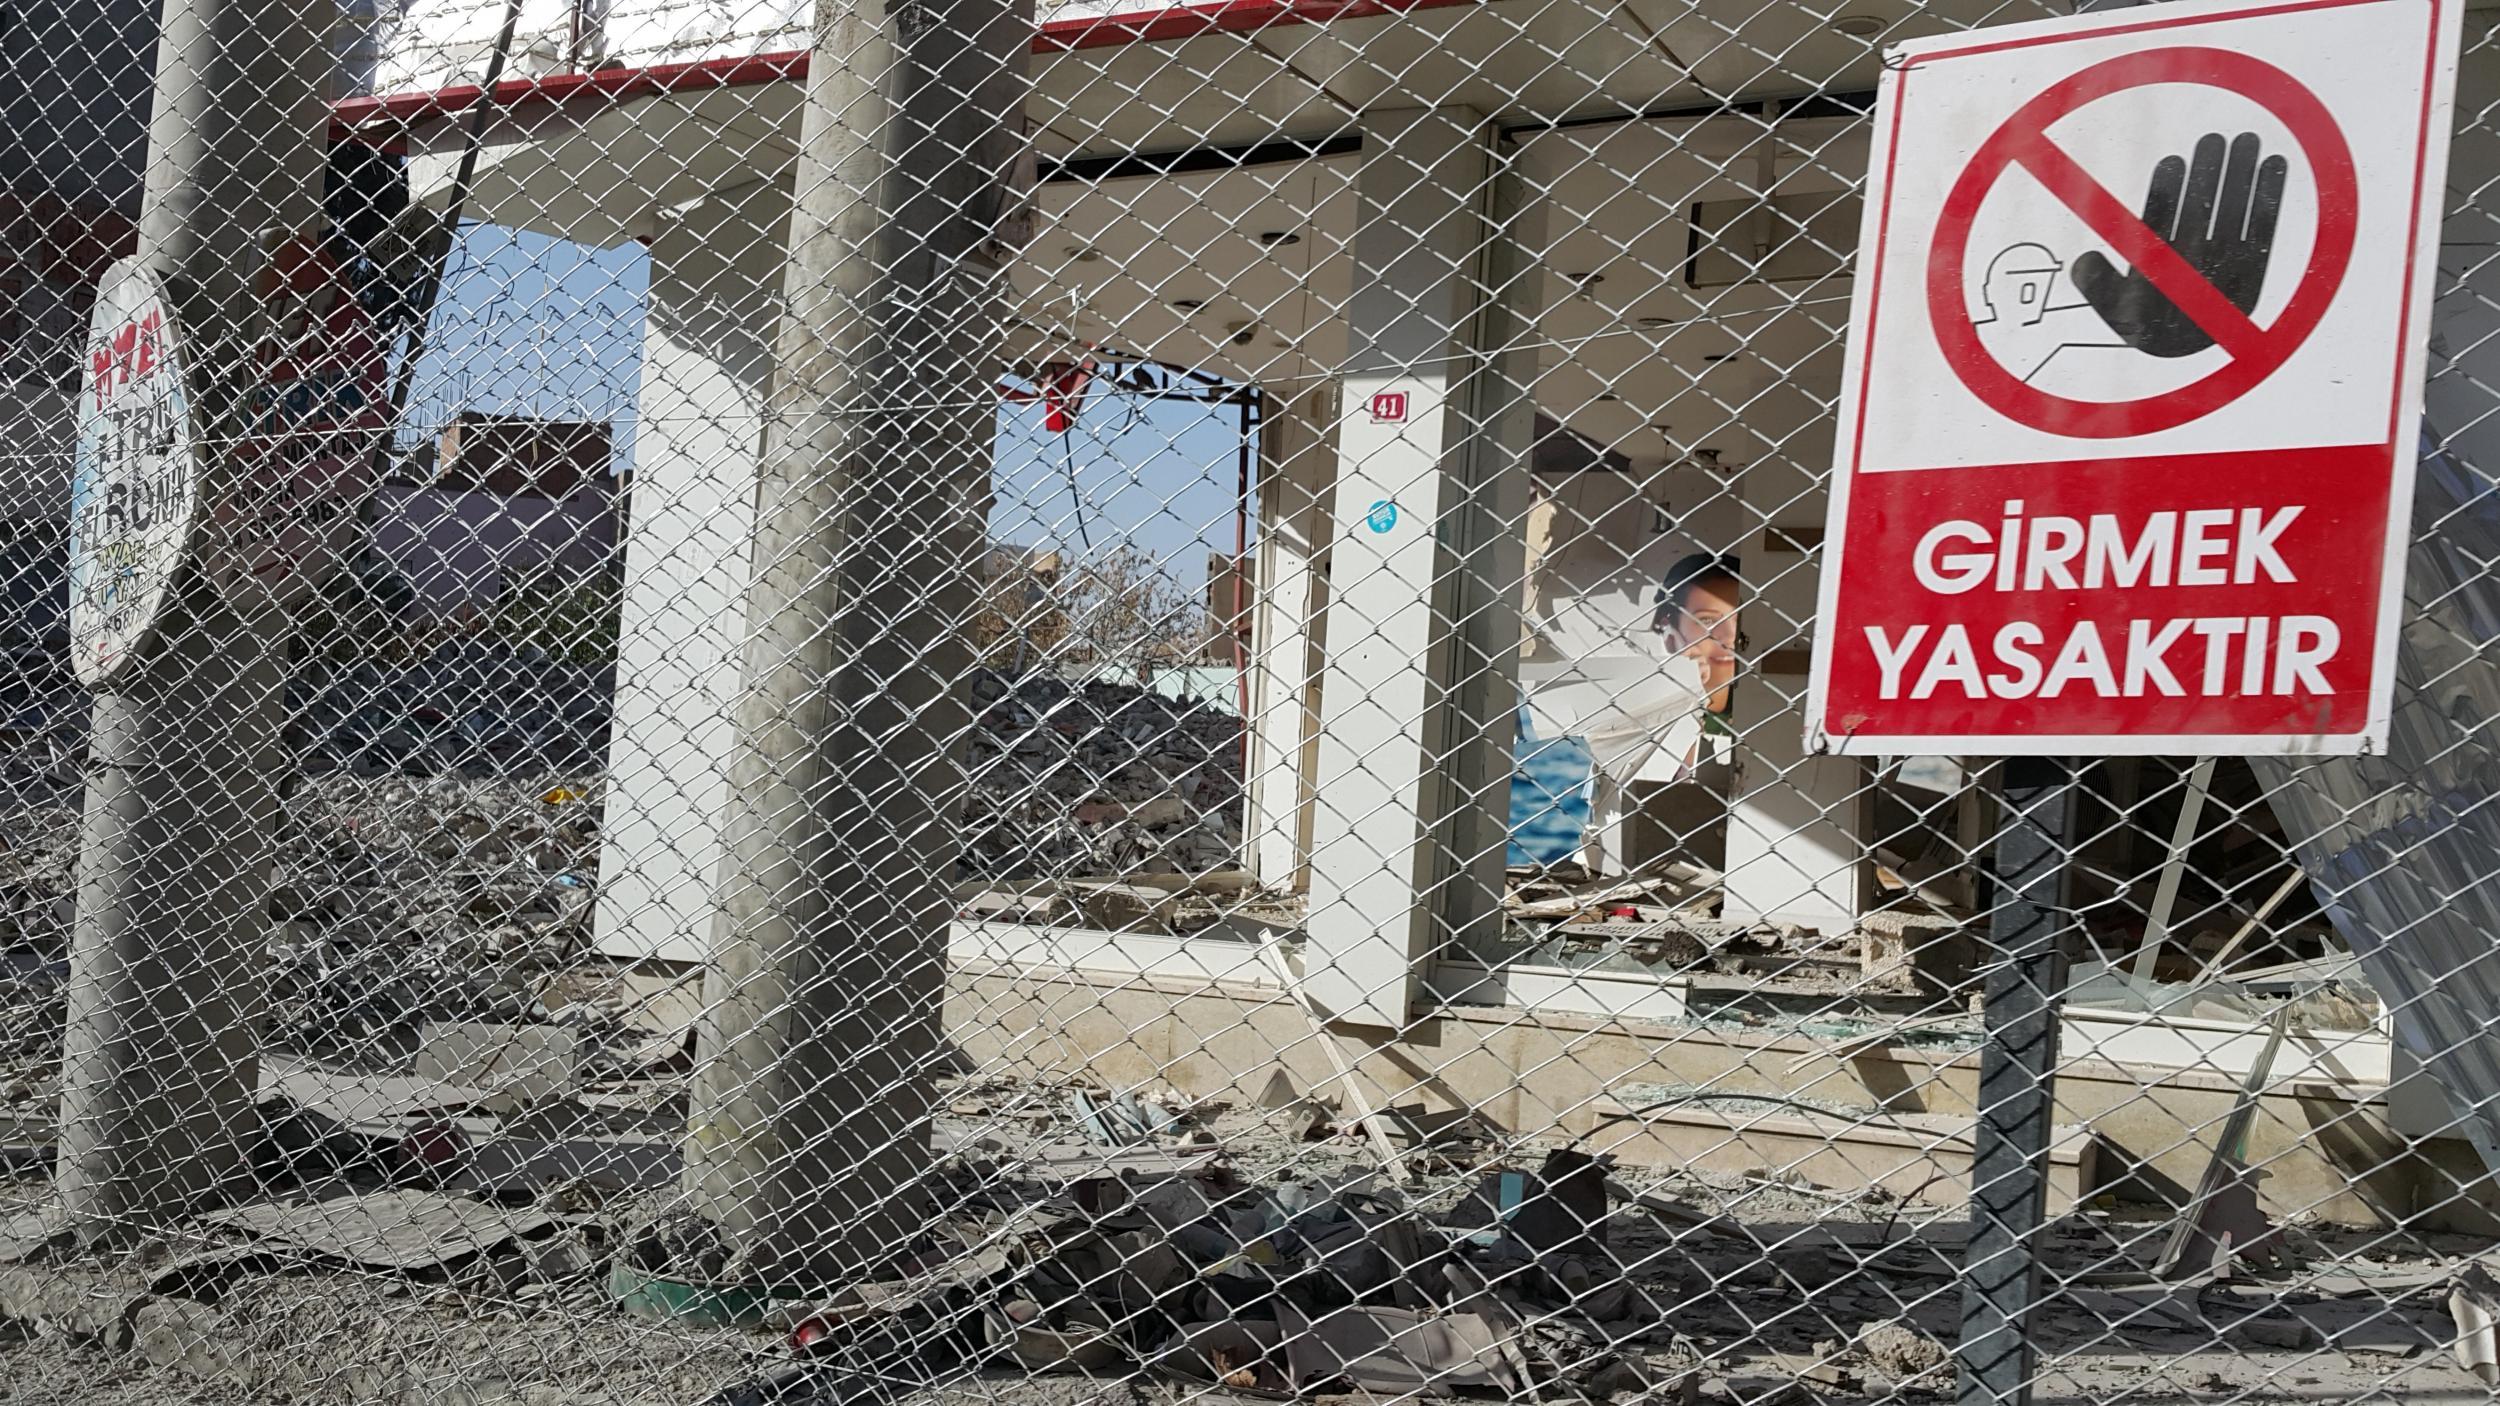 &#13;
The Turkish army is leveling the war ruins of Nusaybin .&#13;